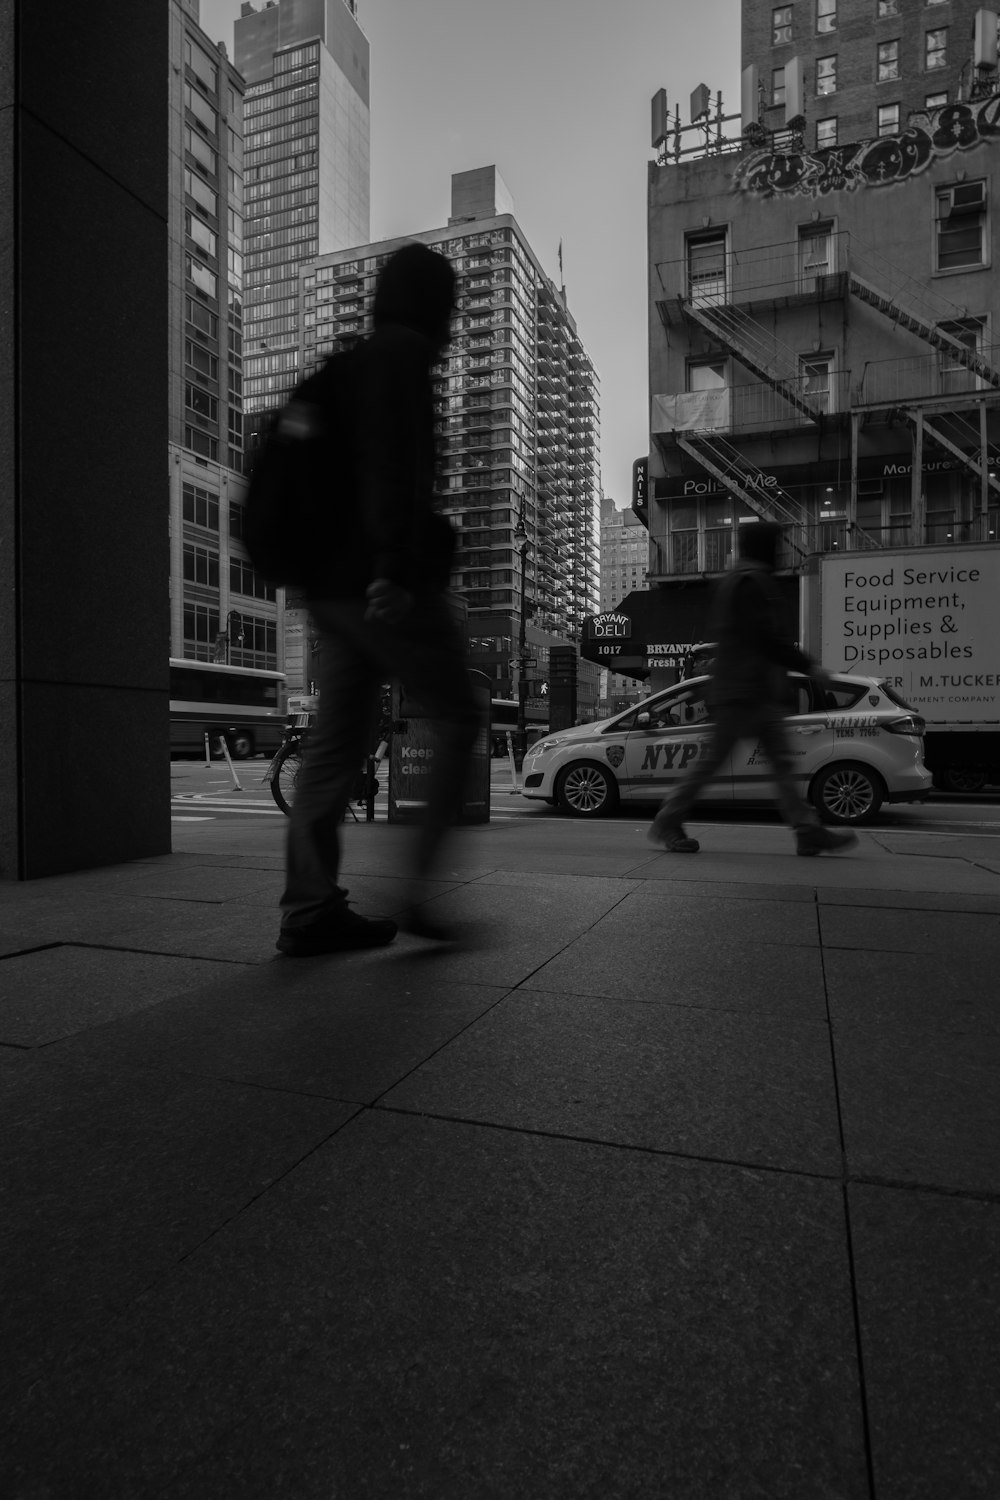 a couple of people walking down a street next to tall buildings